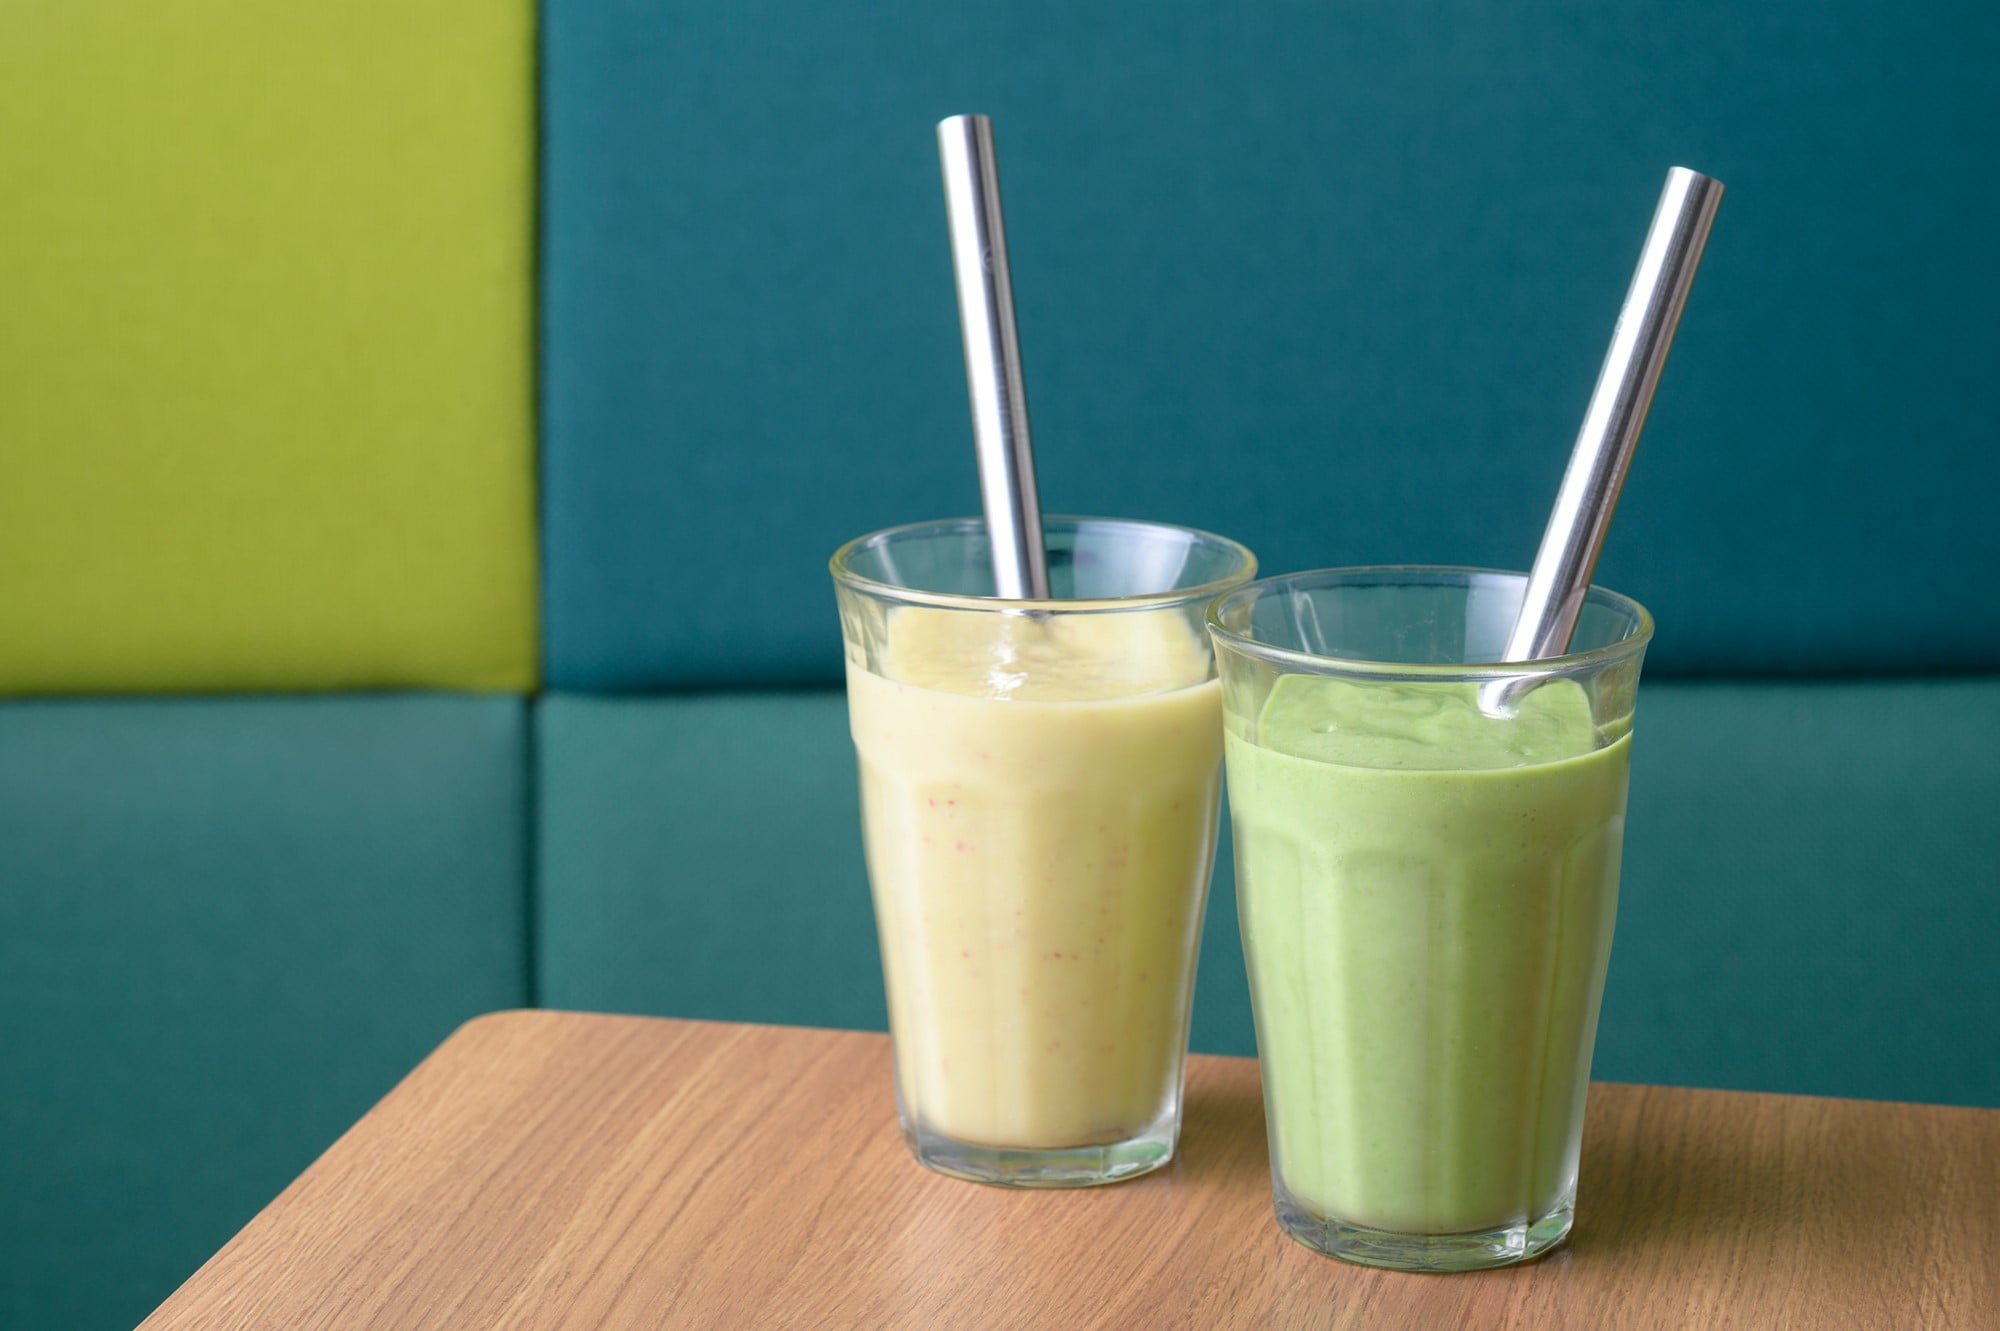 The Beauty Fiber Smoothie is made of ginger and avocado and the Green Power Smoothie is made of spinach and komatsuna (Japanese mustard spinach).